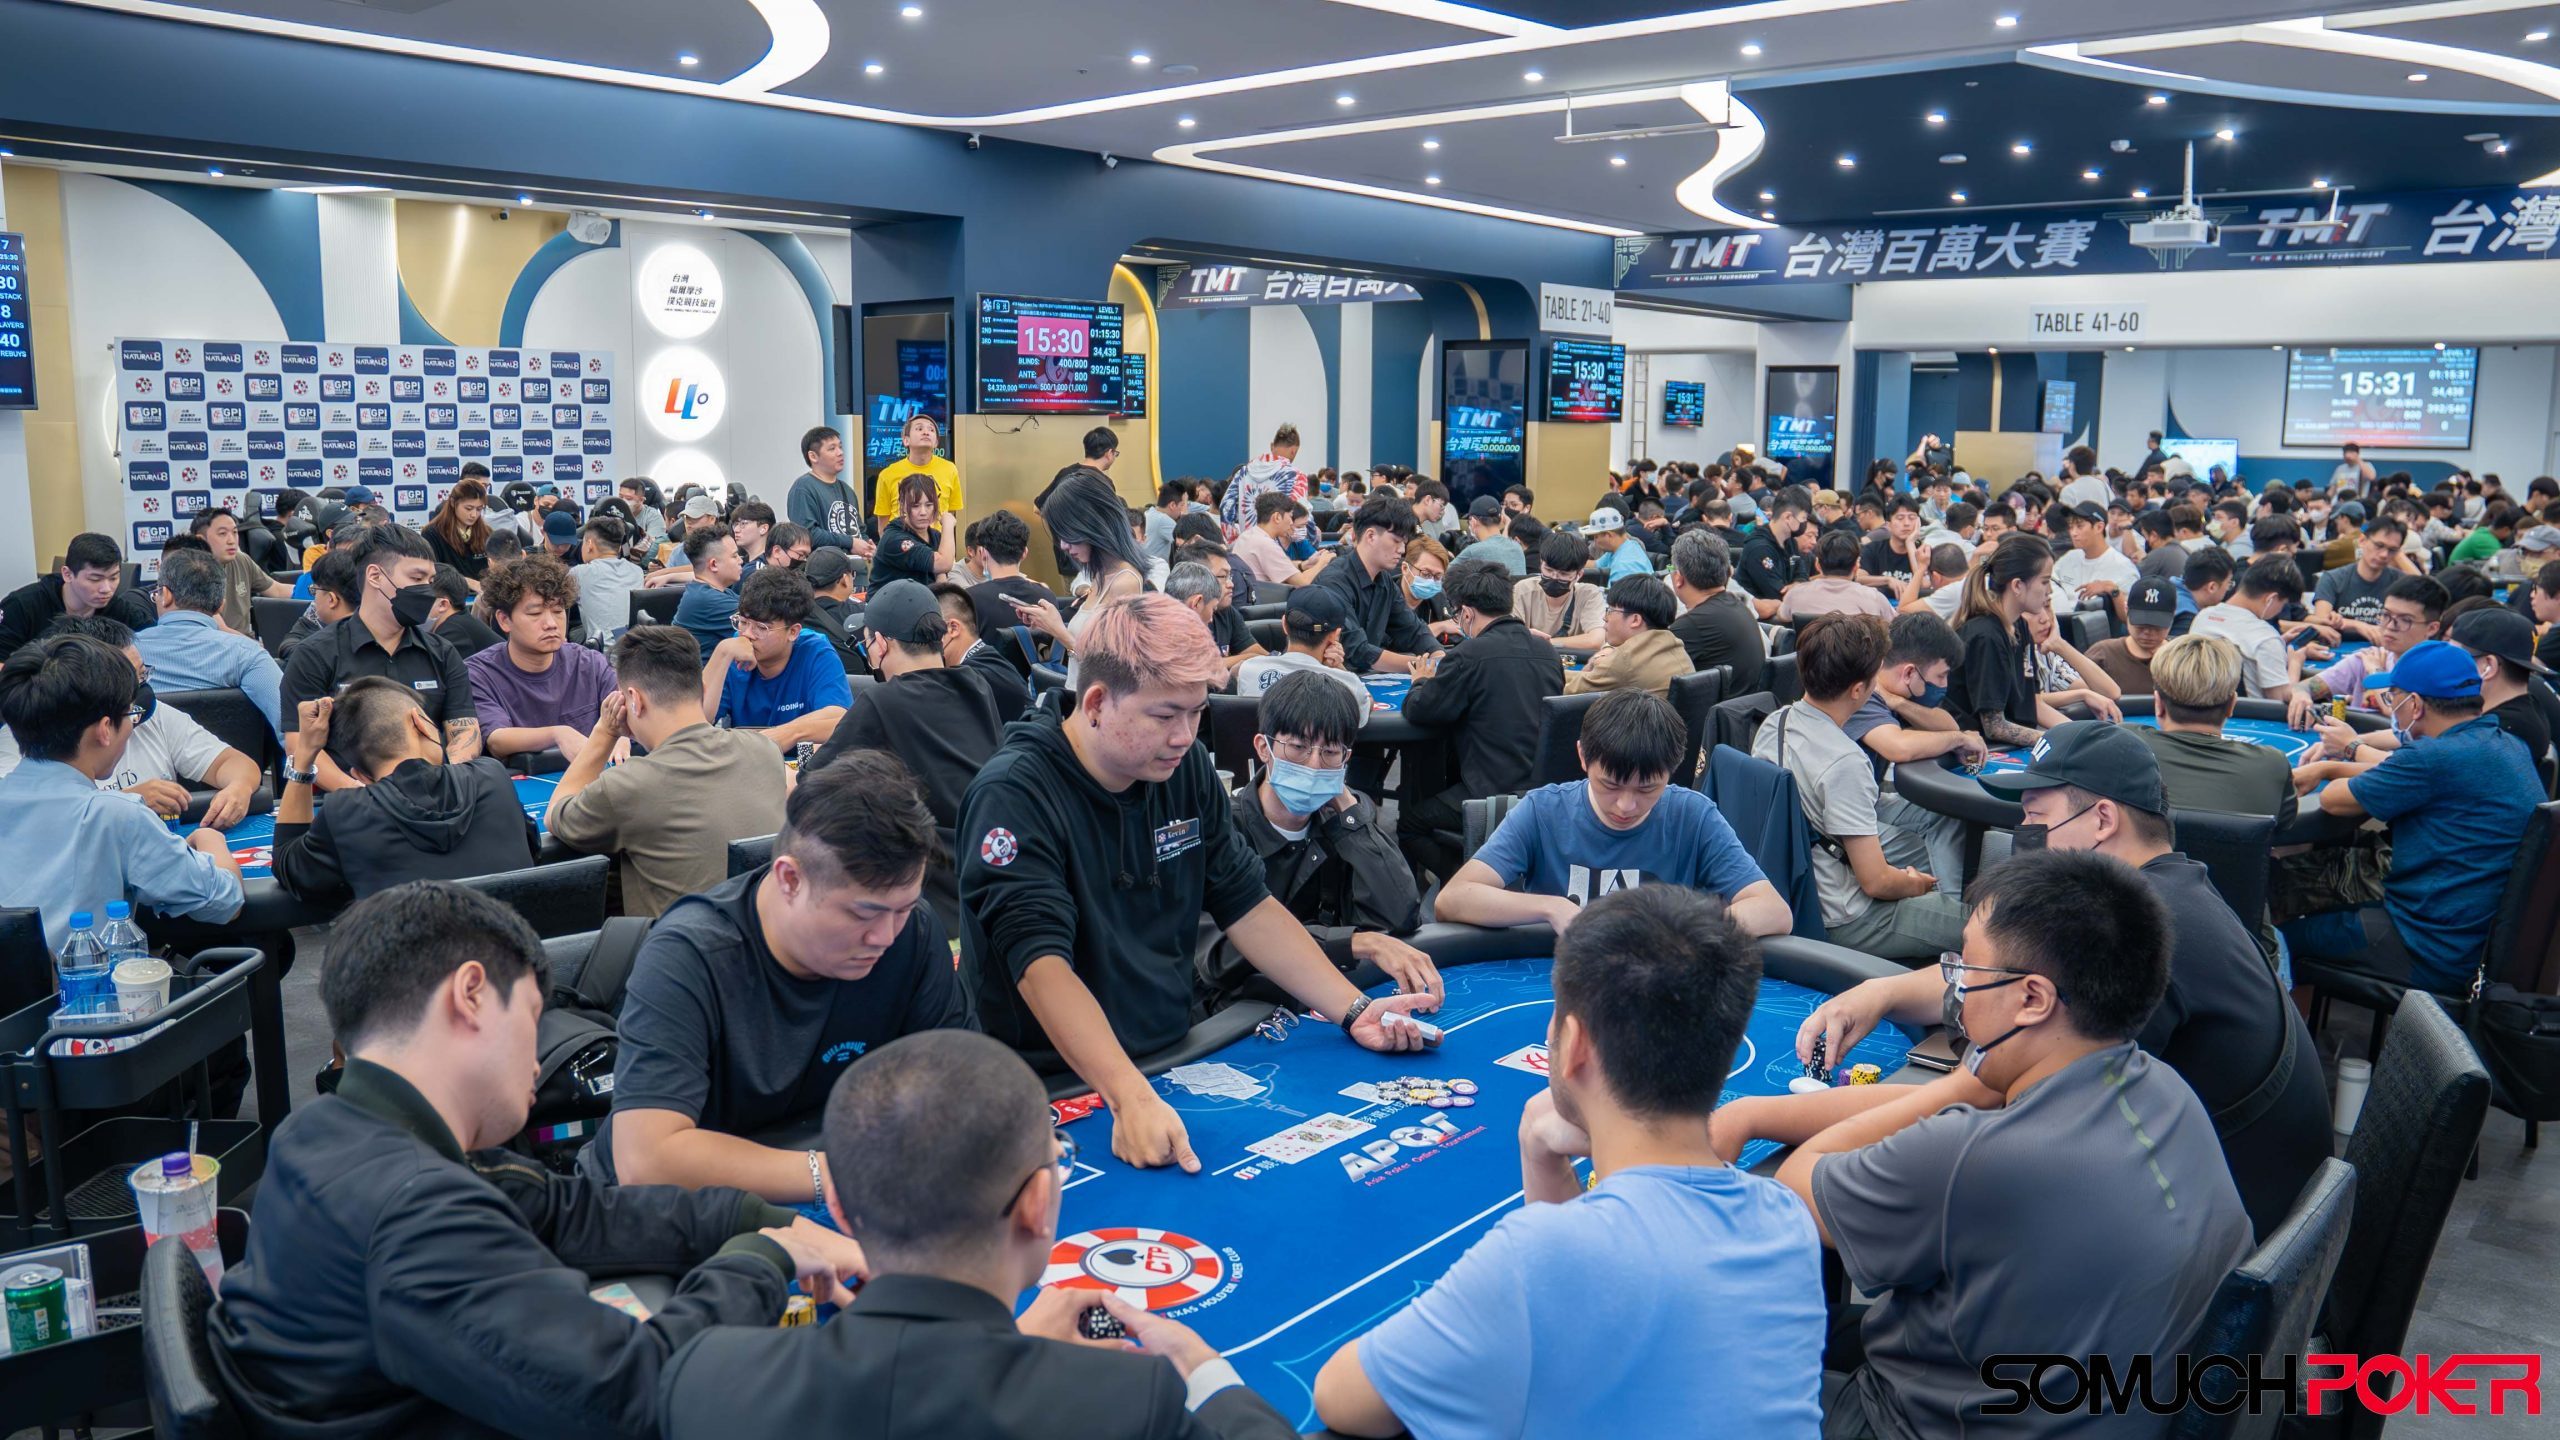 14th Edition of Taiwan Millions Tournament Main Event on center stage - Day 1B underway